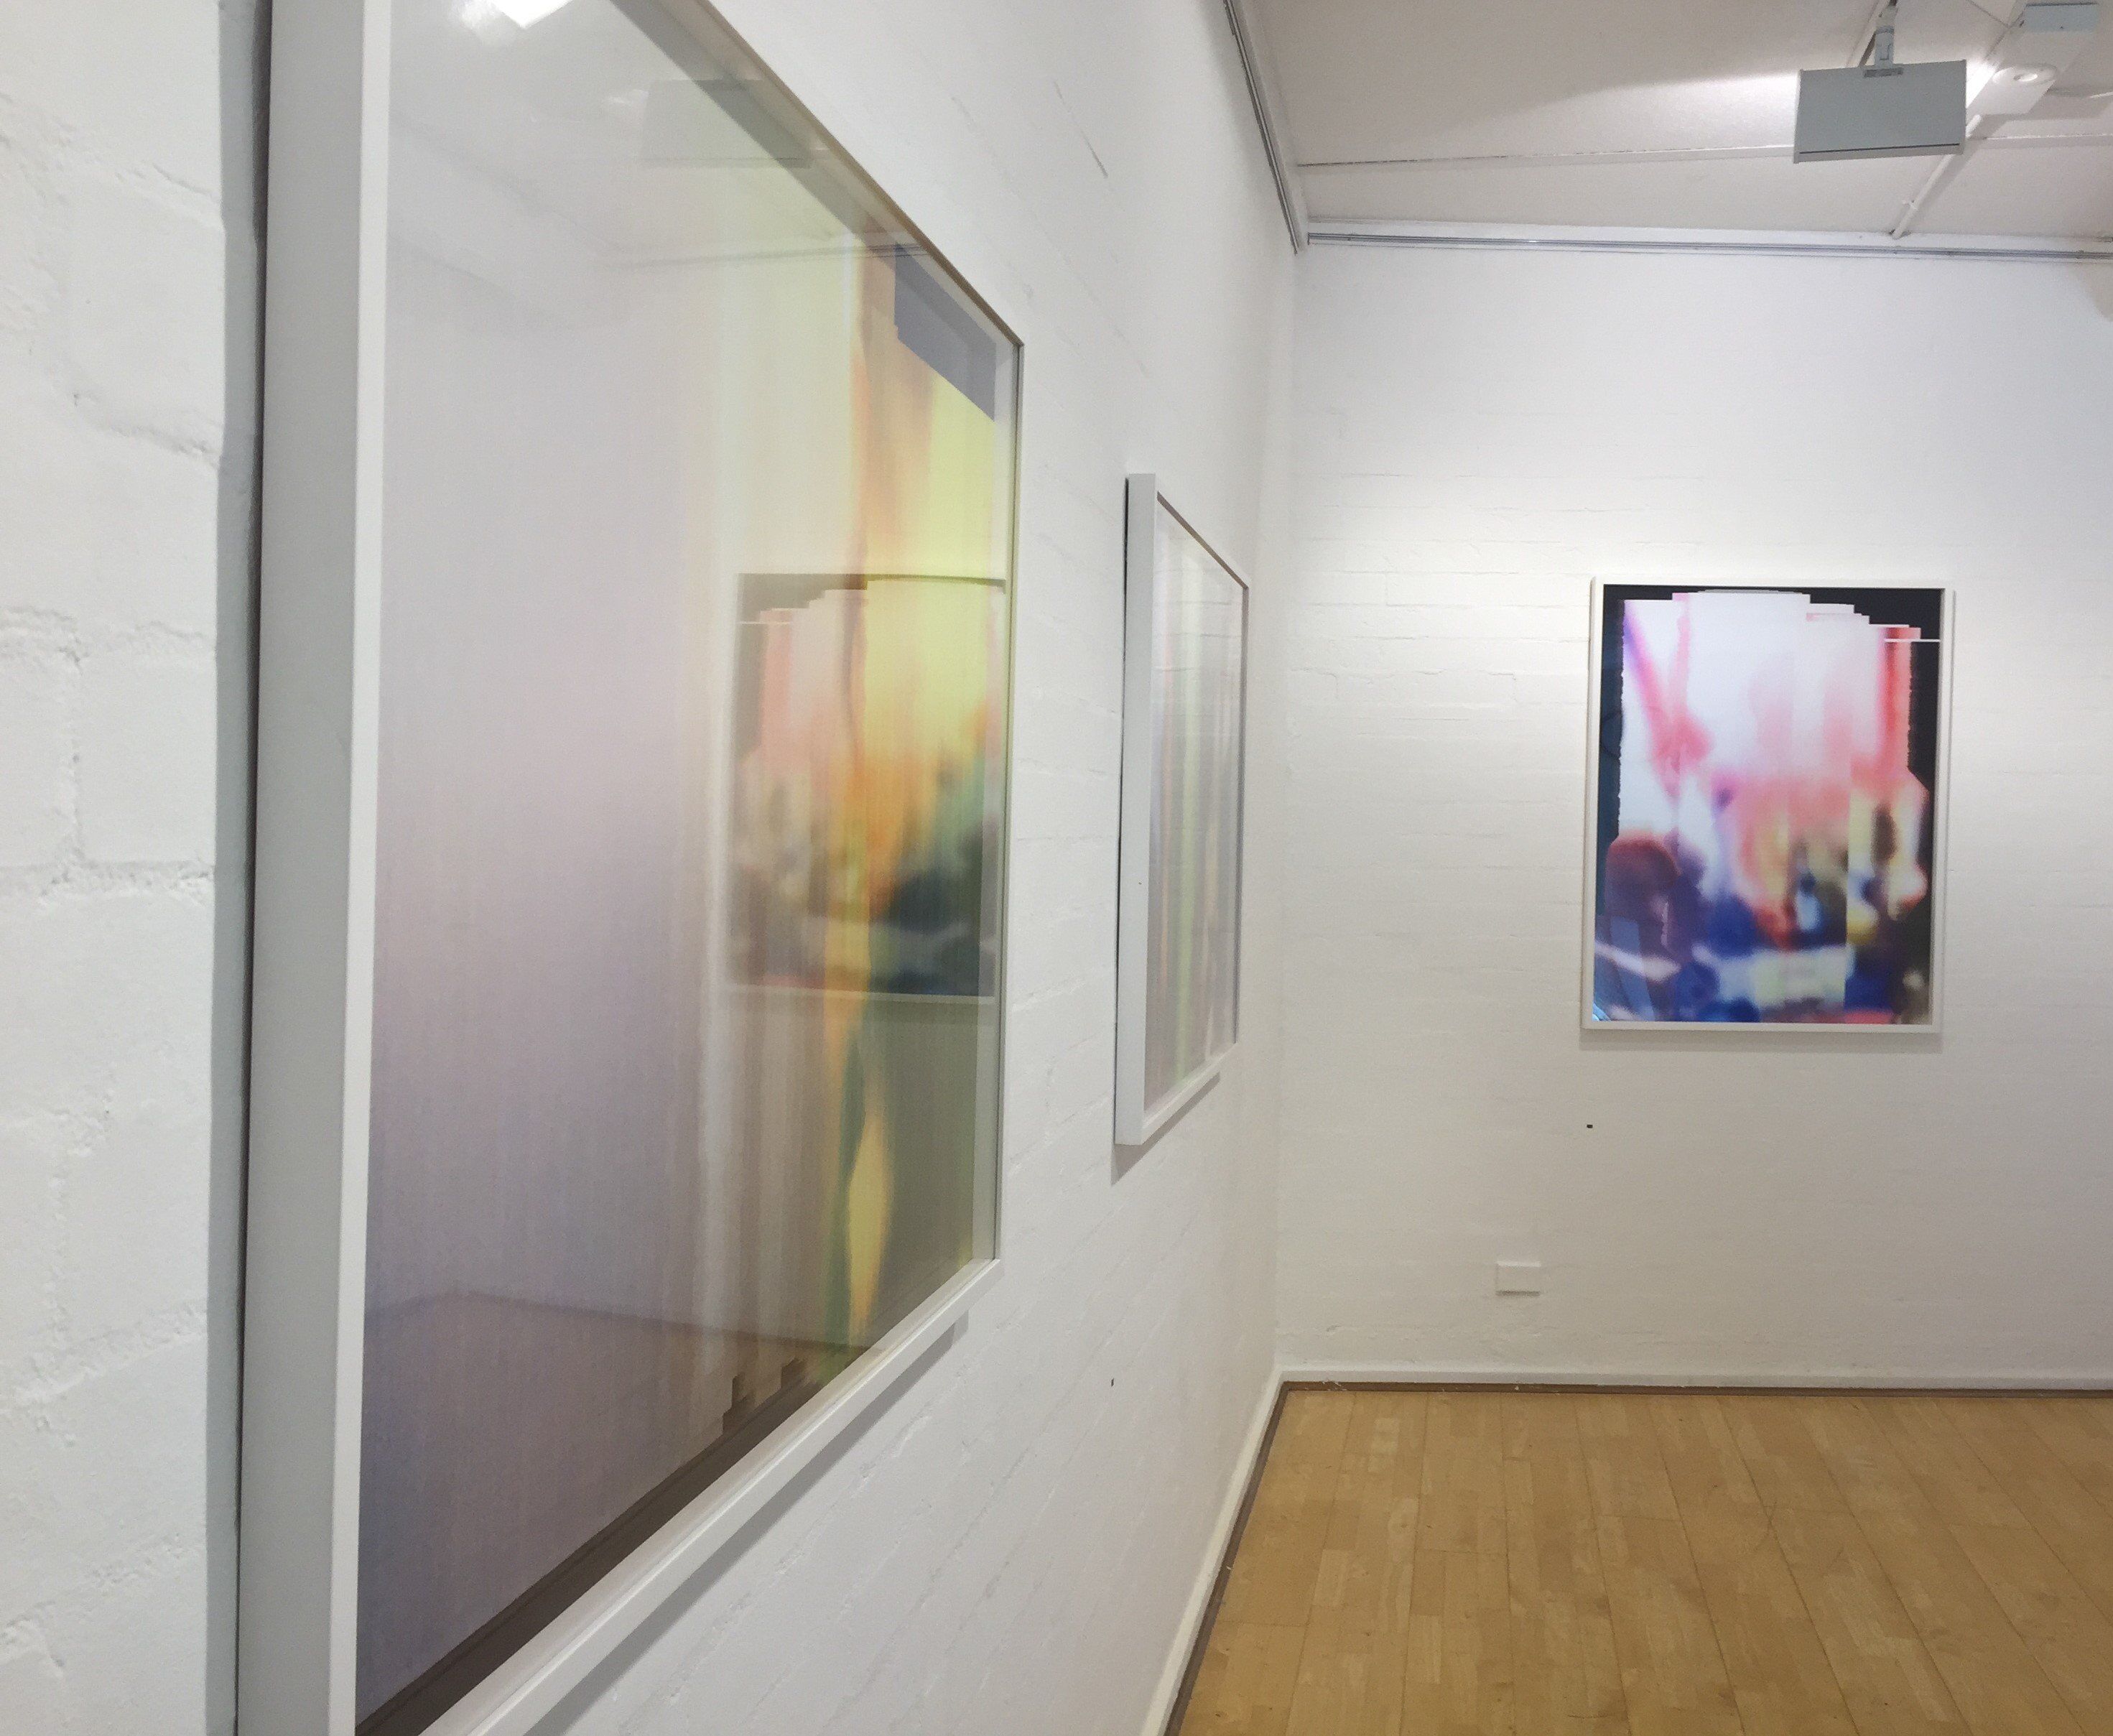 Installation view - PhotoAccess Gallery, Canberra - May, 2018